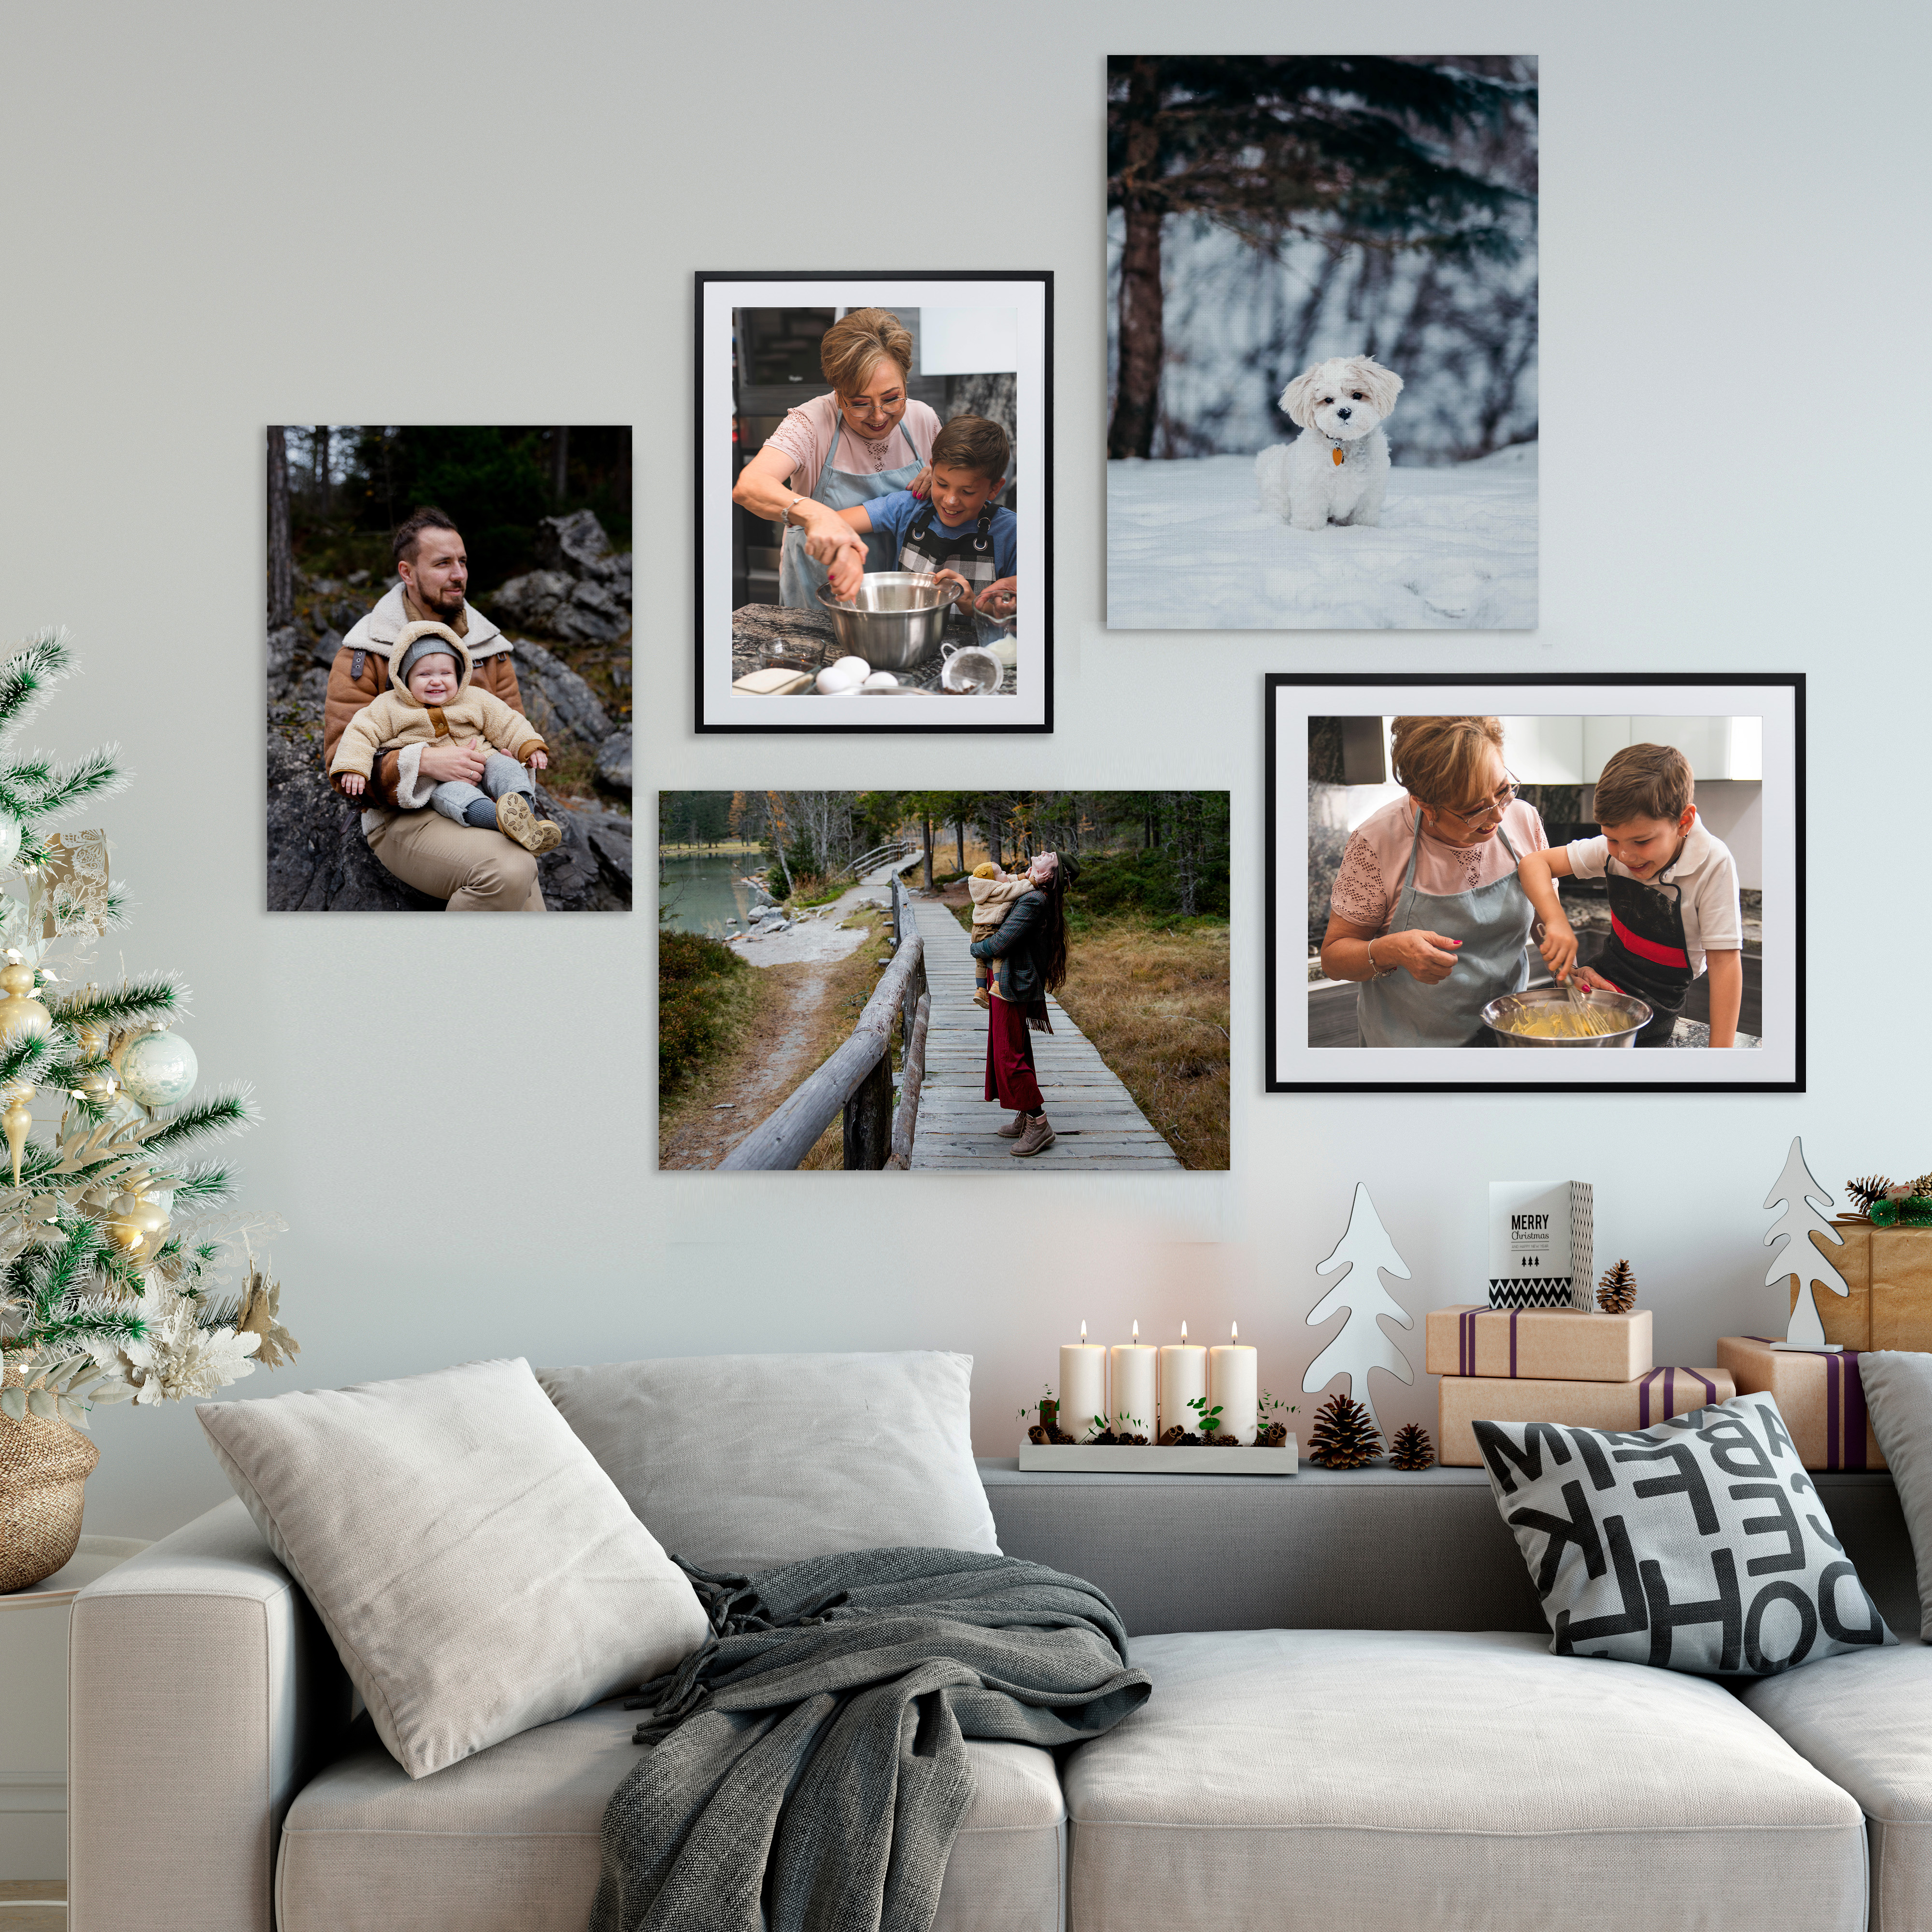 Gallery wall of canvas and framed prints of various family and pet photos